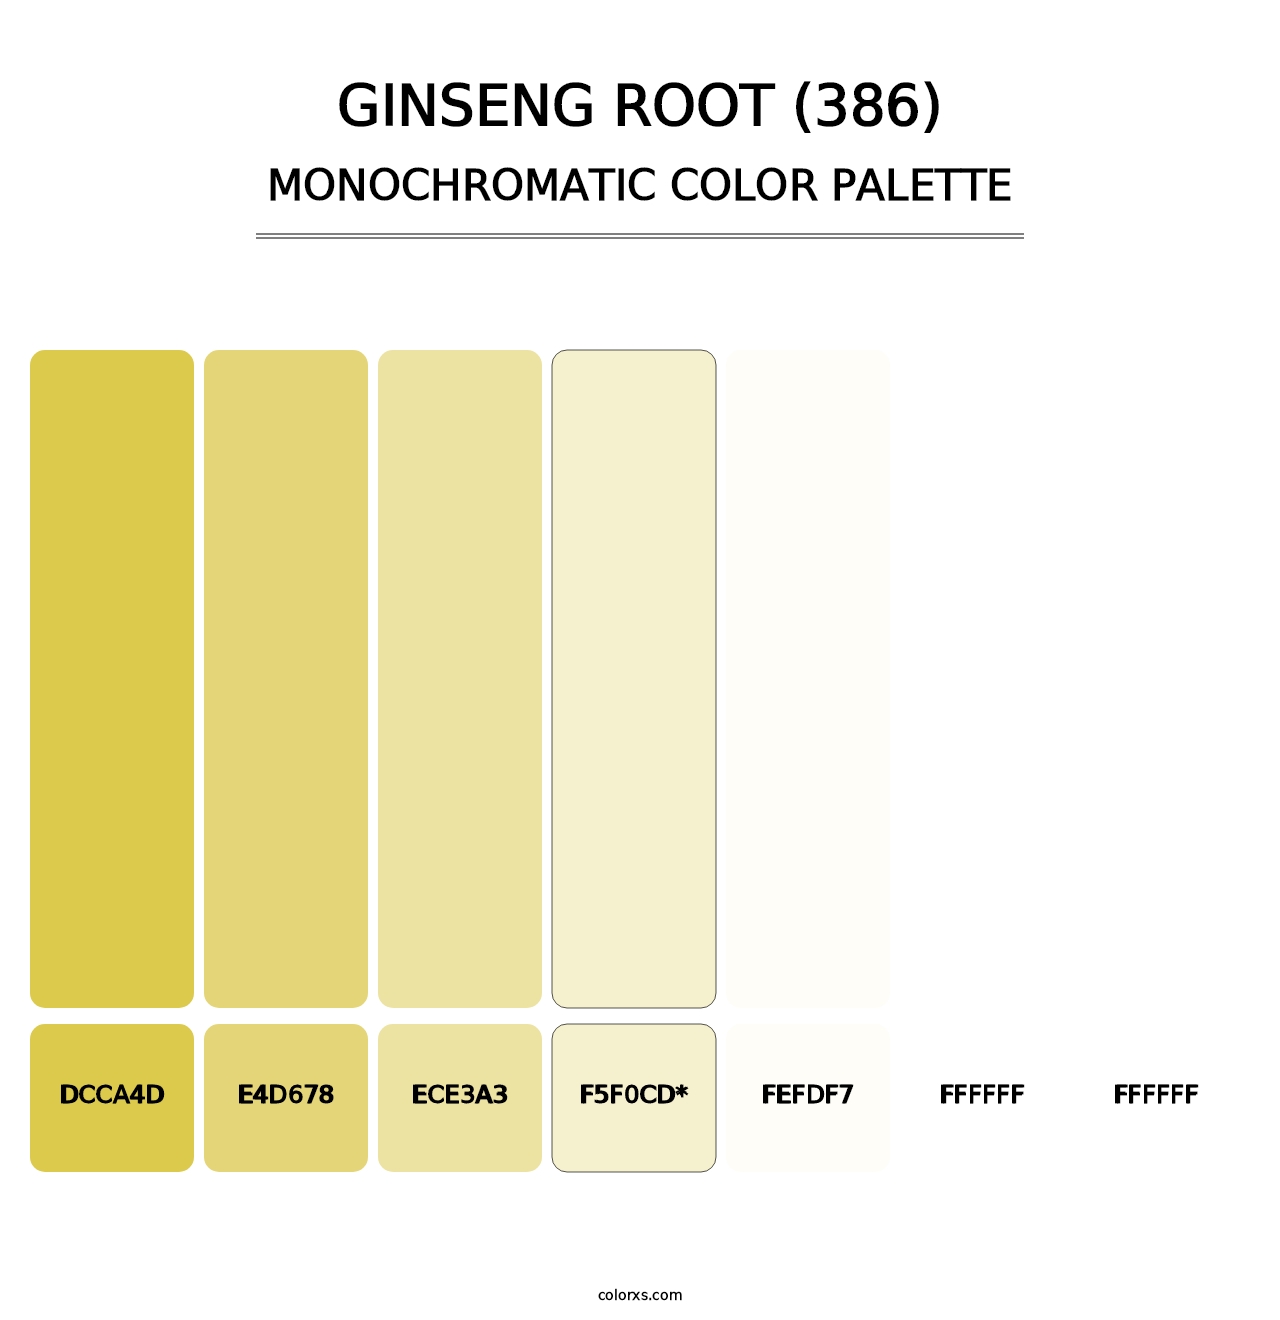 Ginseng Root (386) - Monochromatic Color Palette